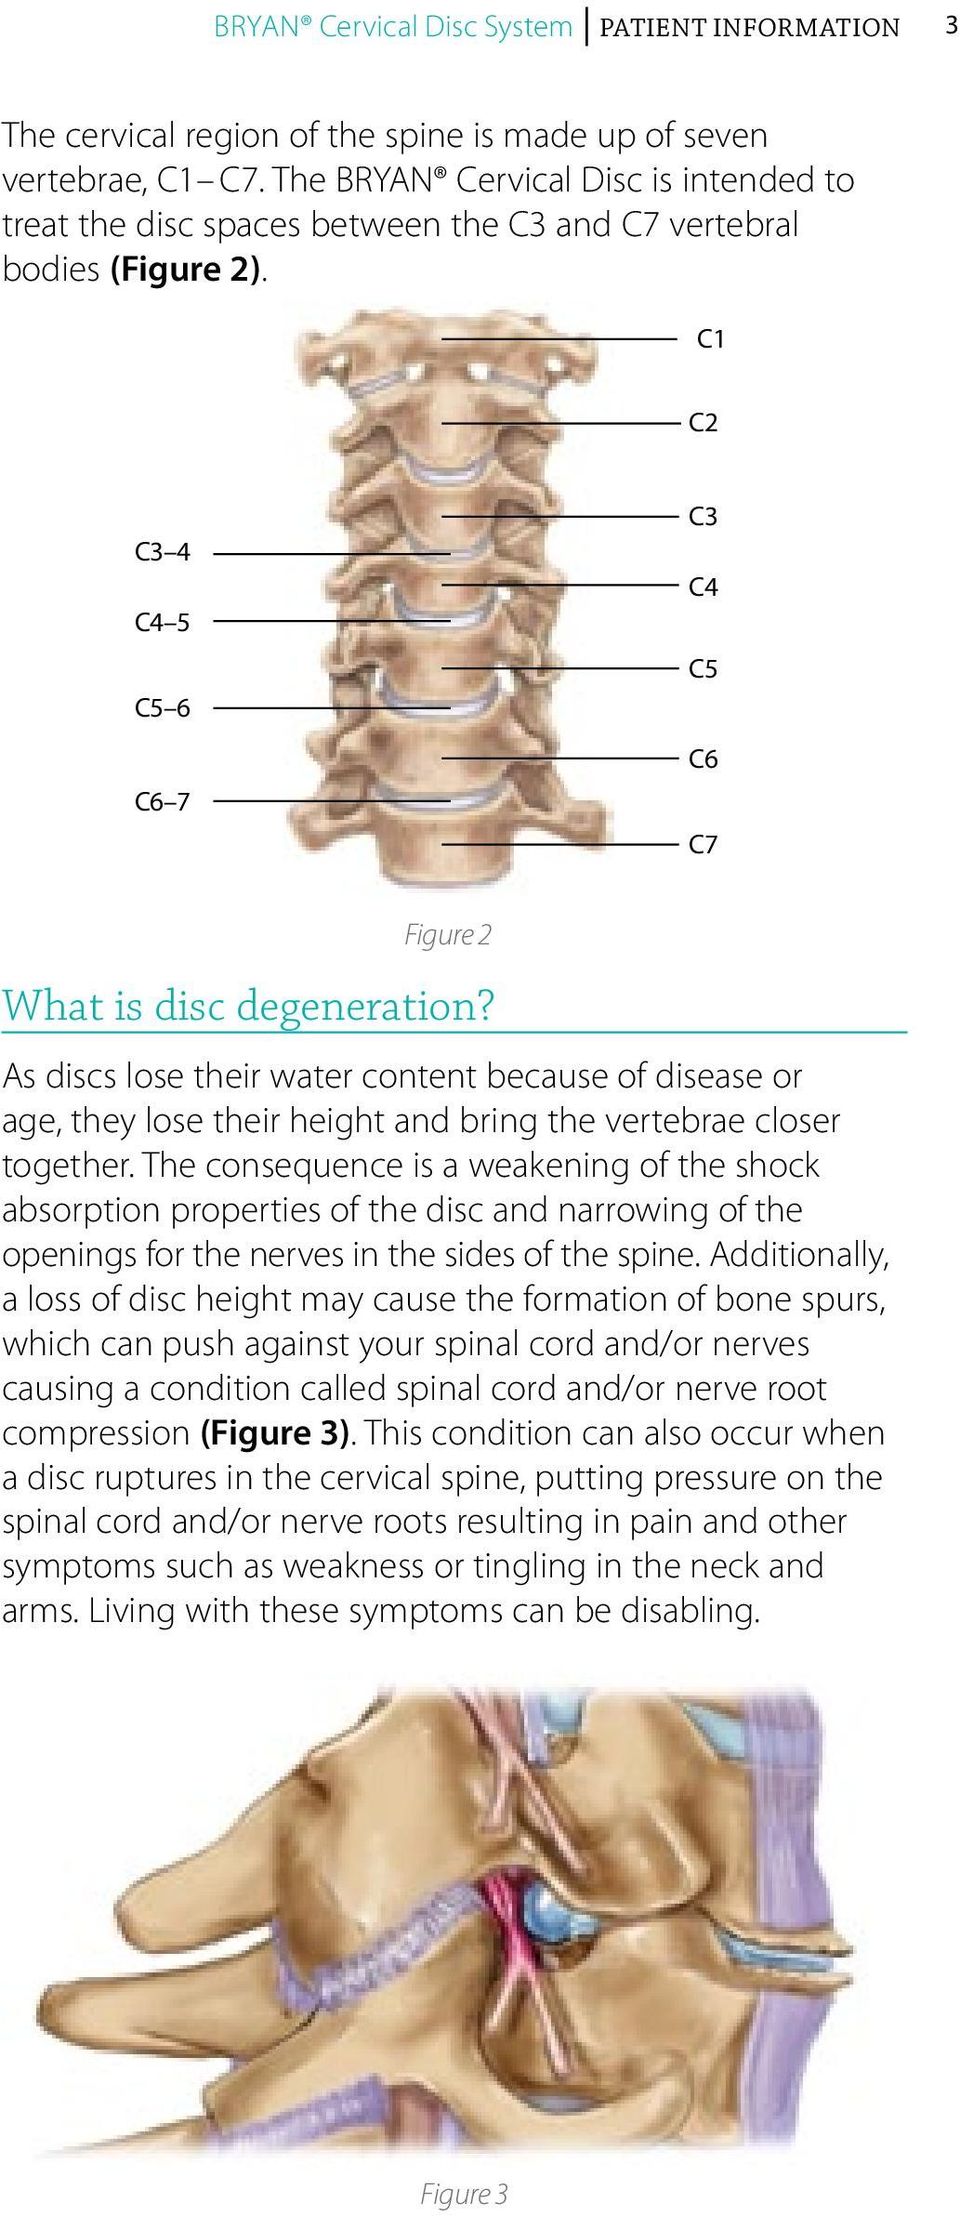 As discs lose their water content because of disease or age, they lose their height and bring the vertebrae closer together.